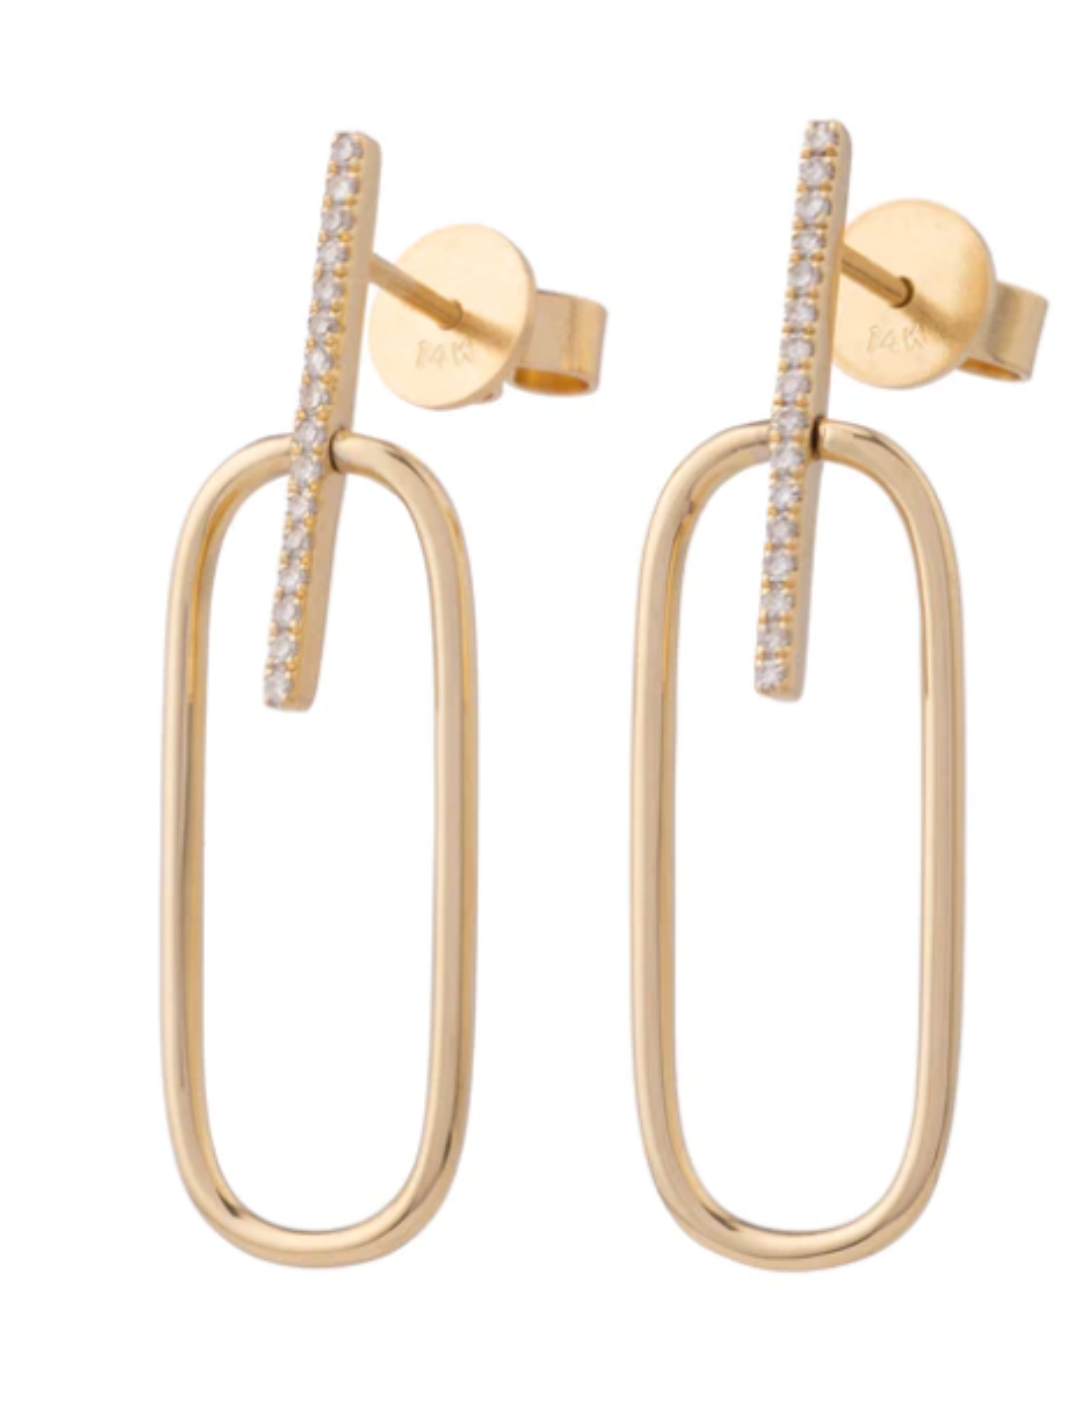 DIAMOND BAR EARRING WITH LARGE PAPER CLIP LINK IN 14K GOLD - Romi Boutique